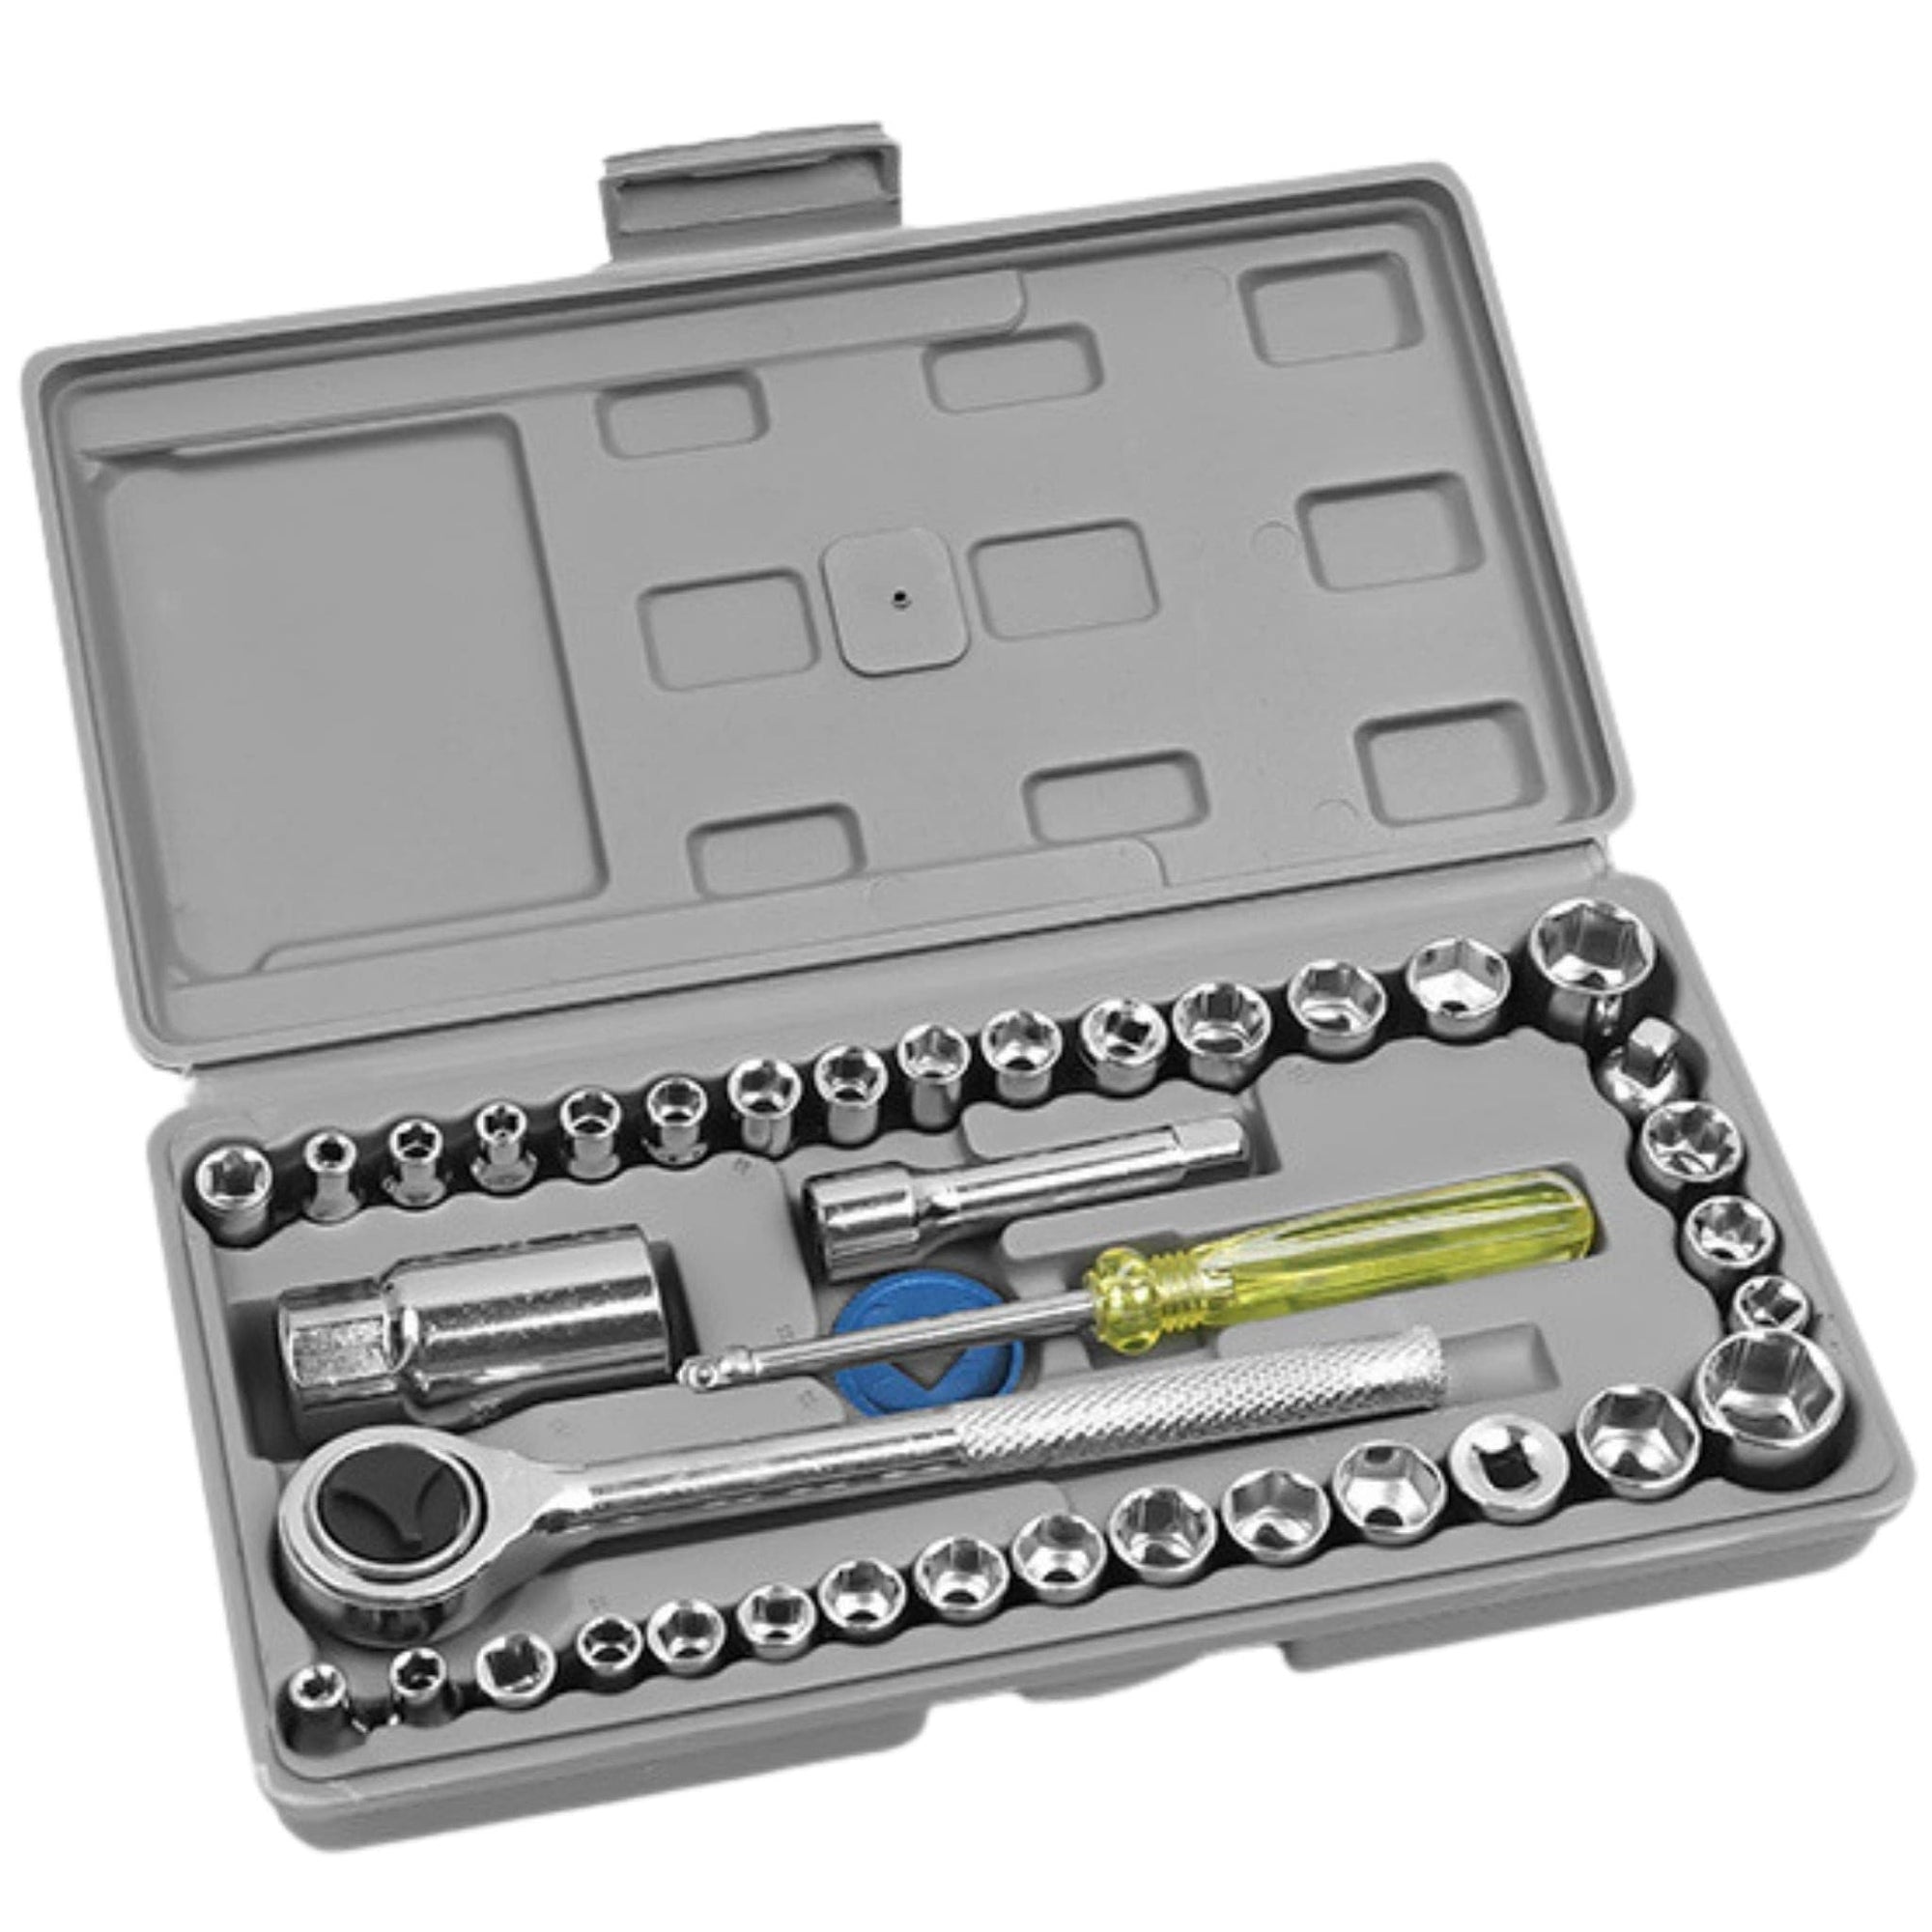 40 piece Socket Wrench Tool Set Repair Maintenance Kit In Box - South East Clearance Centre